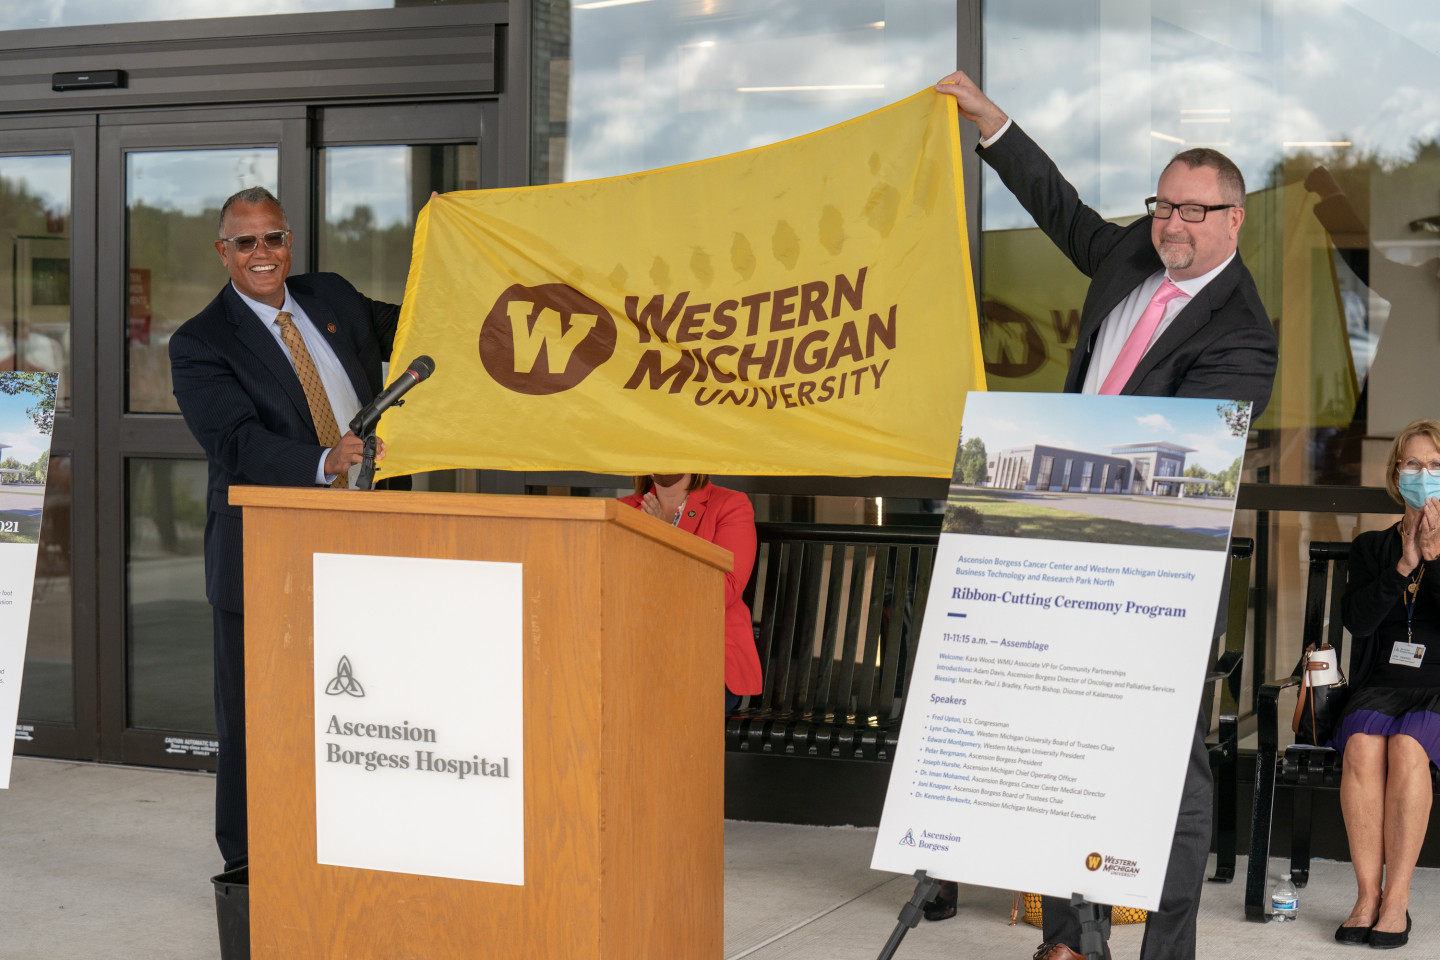 President Montgomery holds up a Western Michigan University flag with President Peter Bergmann of Ascension Borgess in front of the podium of the Ascension Borgess Cancer Center.